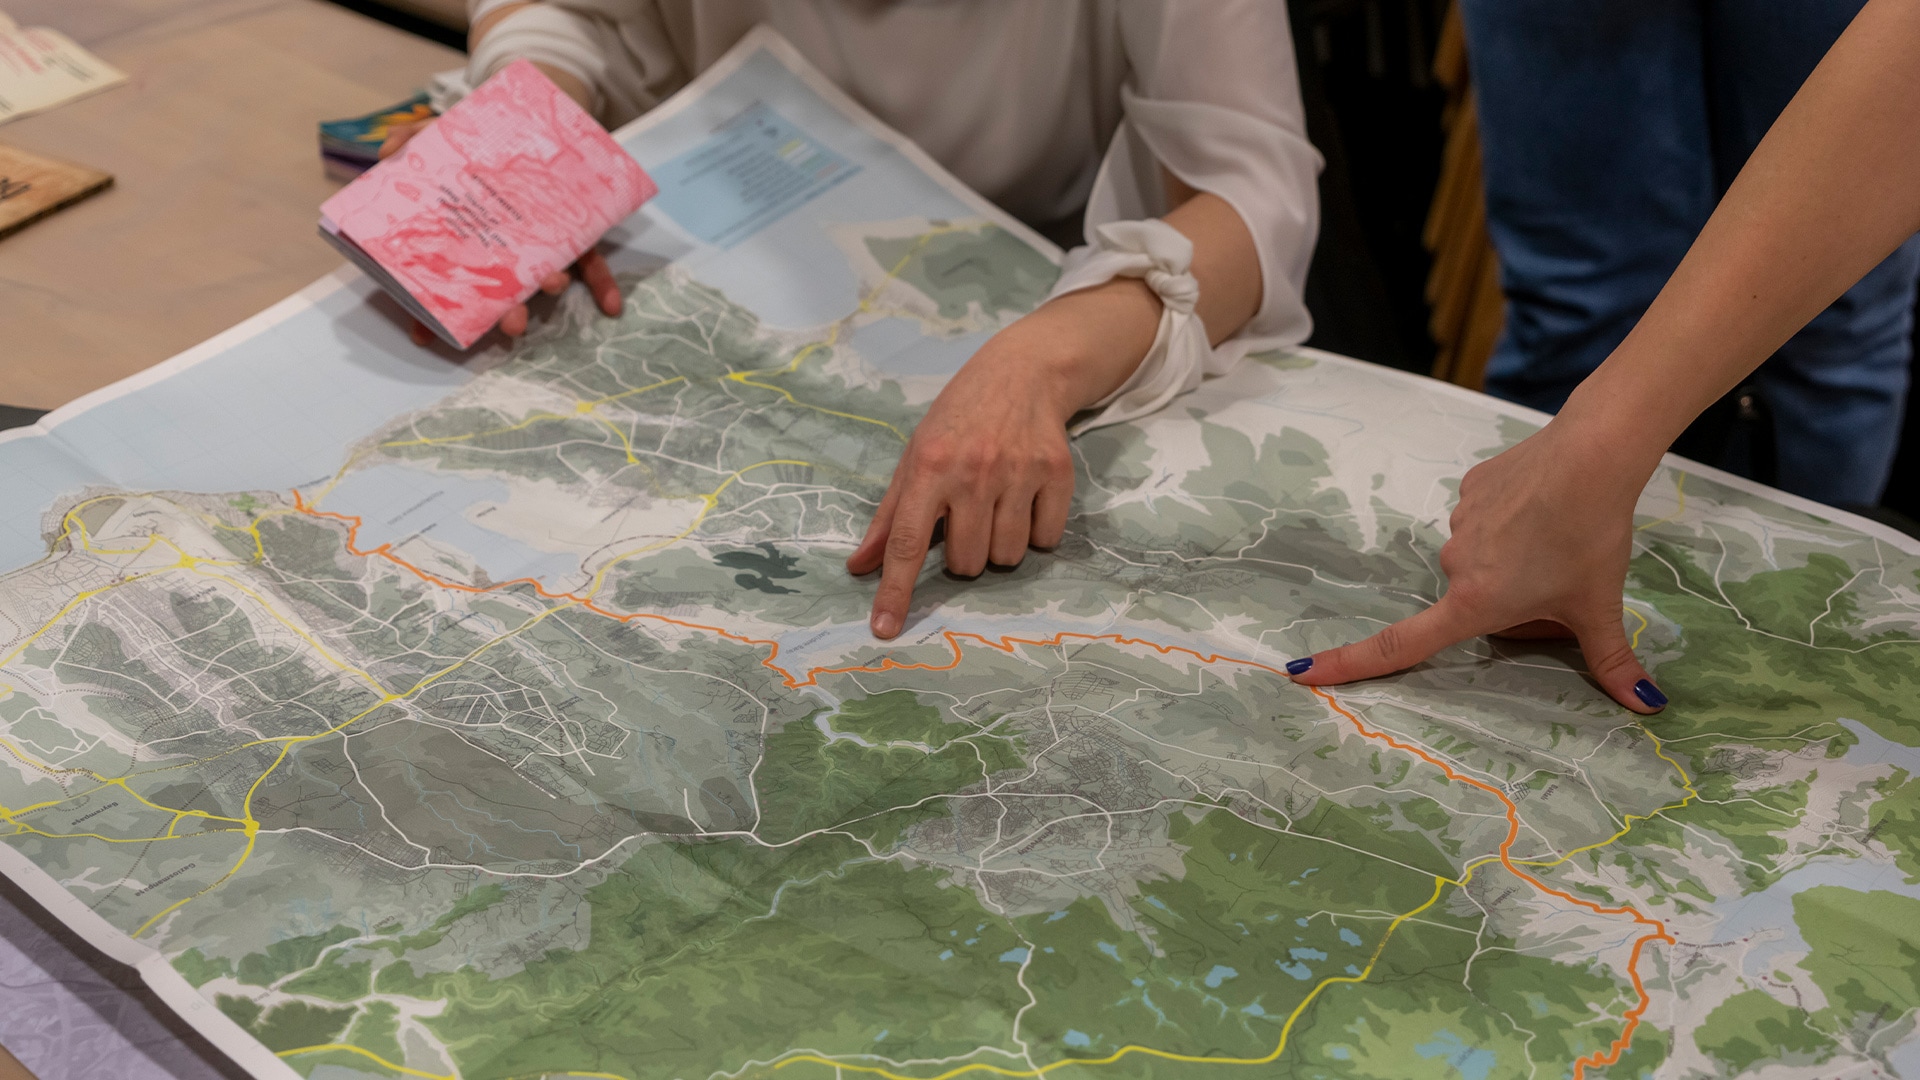 Sounds of the City: Collective Map Making